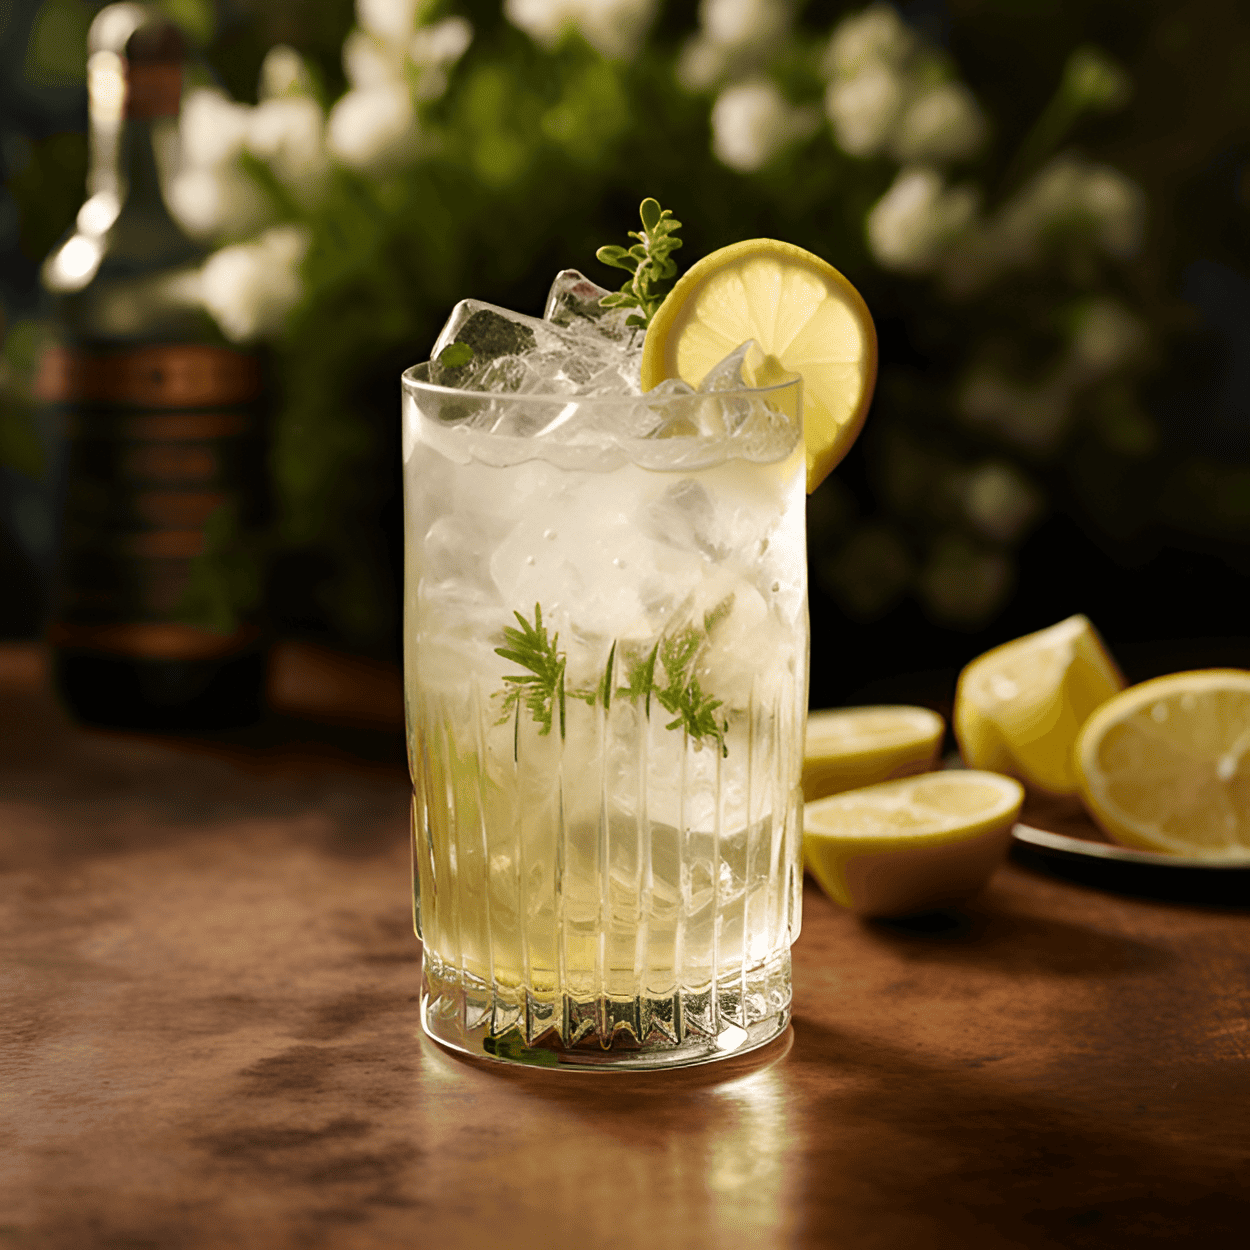 English Highball Cocktail Recipe - The English Highball is a refreshing, effervescent, and slightly sweet cocktail with a hint of bitterness from the tonic water. The botanicals in the gin provide a complex and aromatic flavor profile, while the lemon adds a touch of tartness.